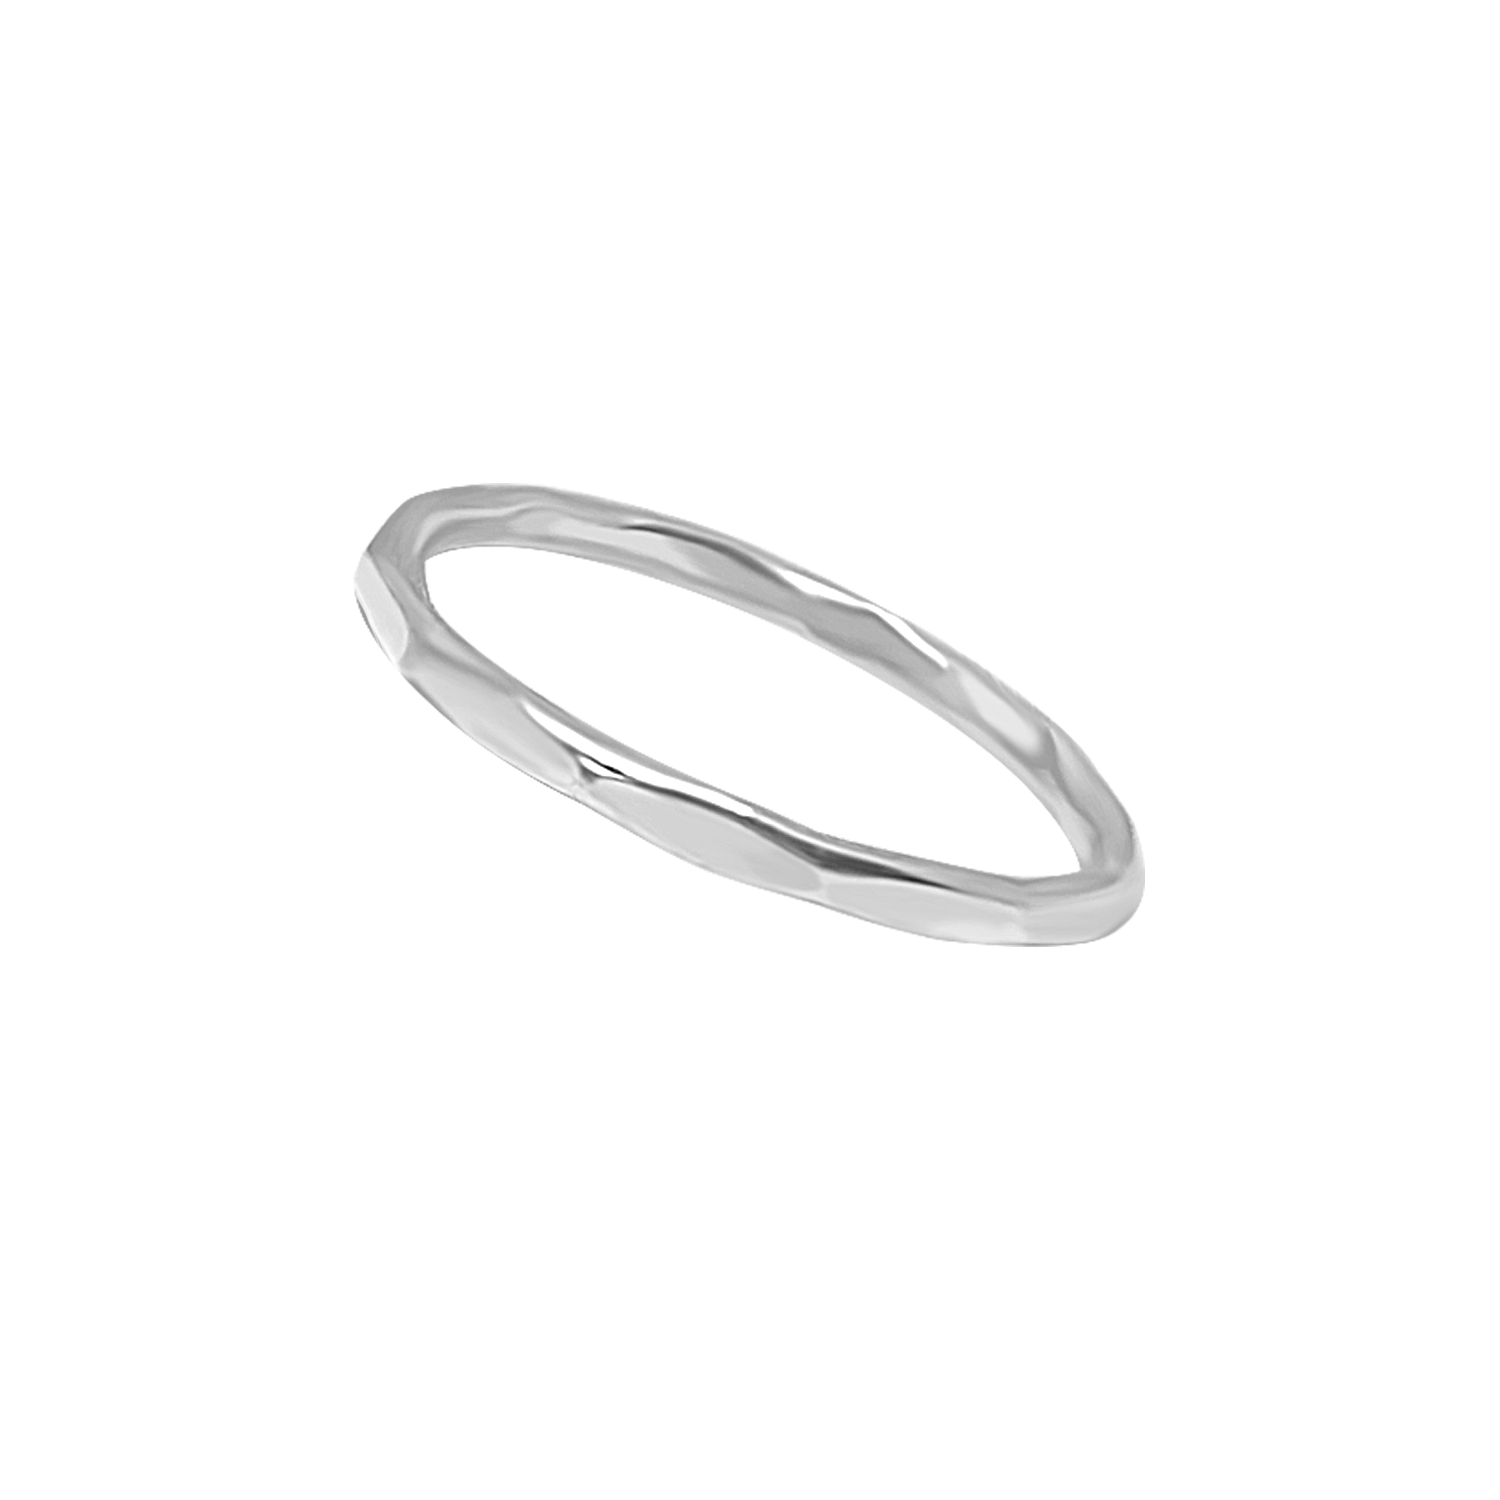 handmade facet style band sterling silver stackable boho chic bohemian jewelry kemmi collection